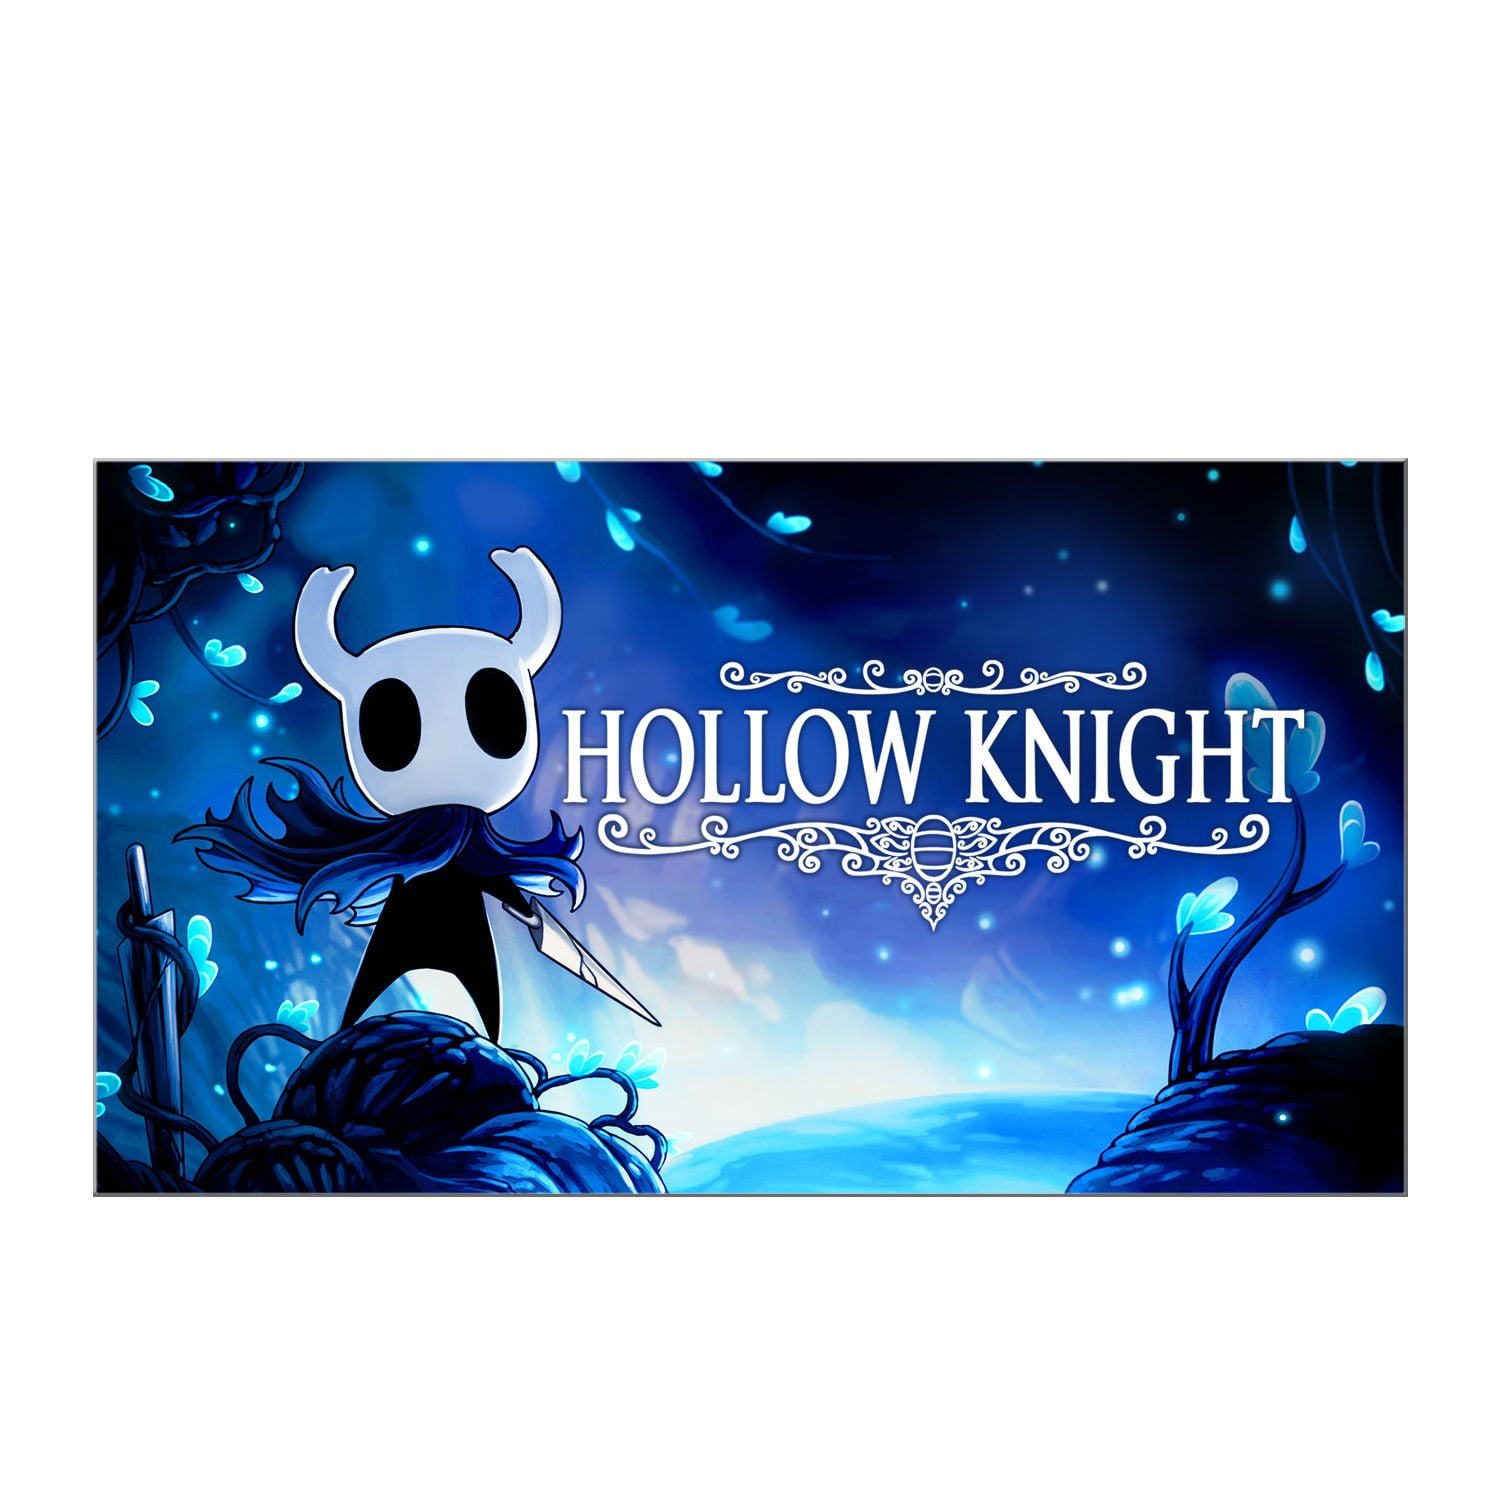 hollow knight download code for switch